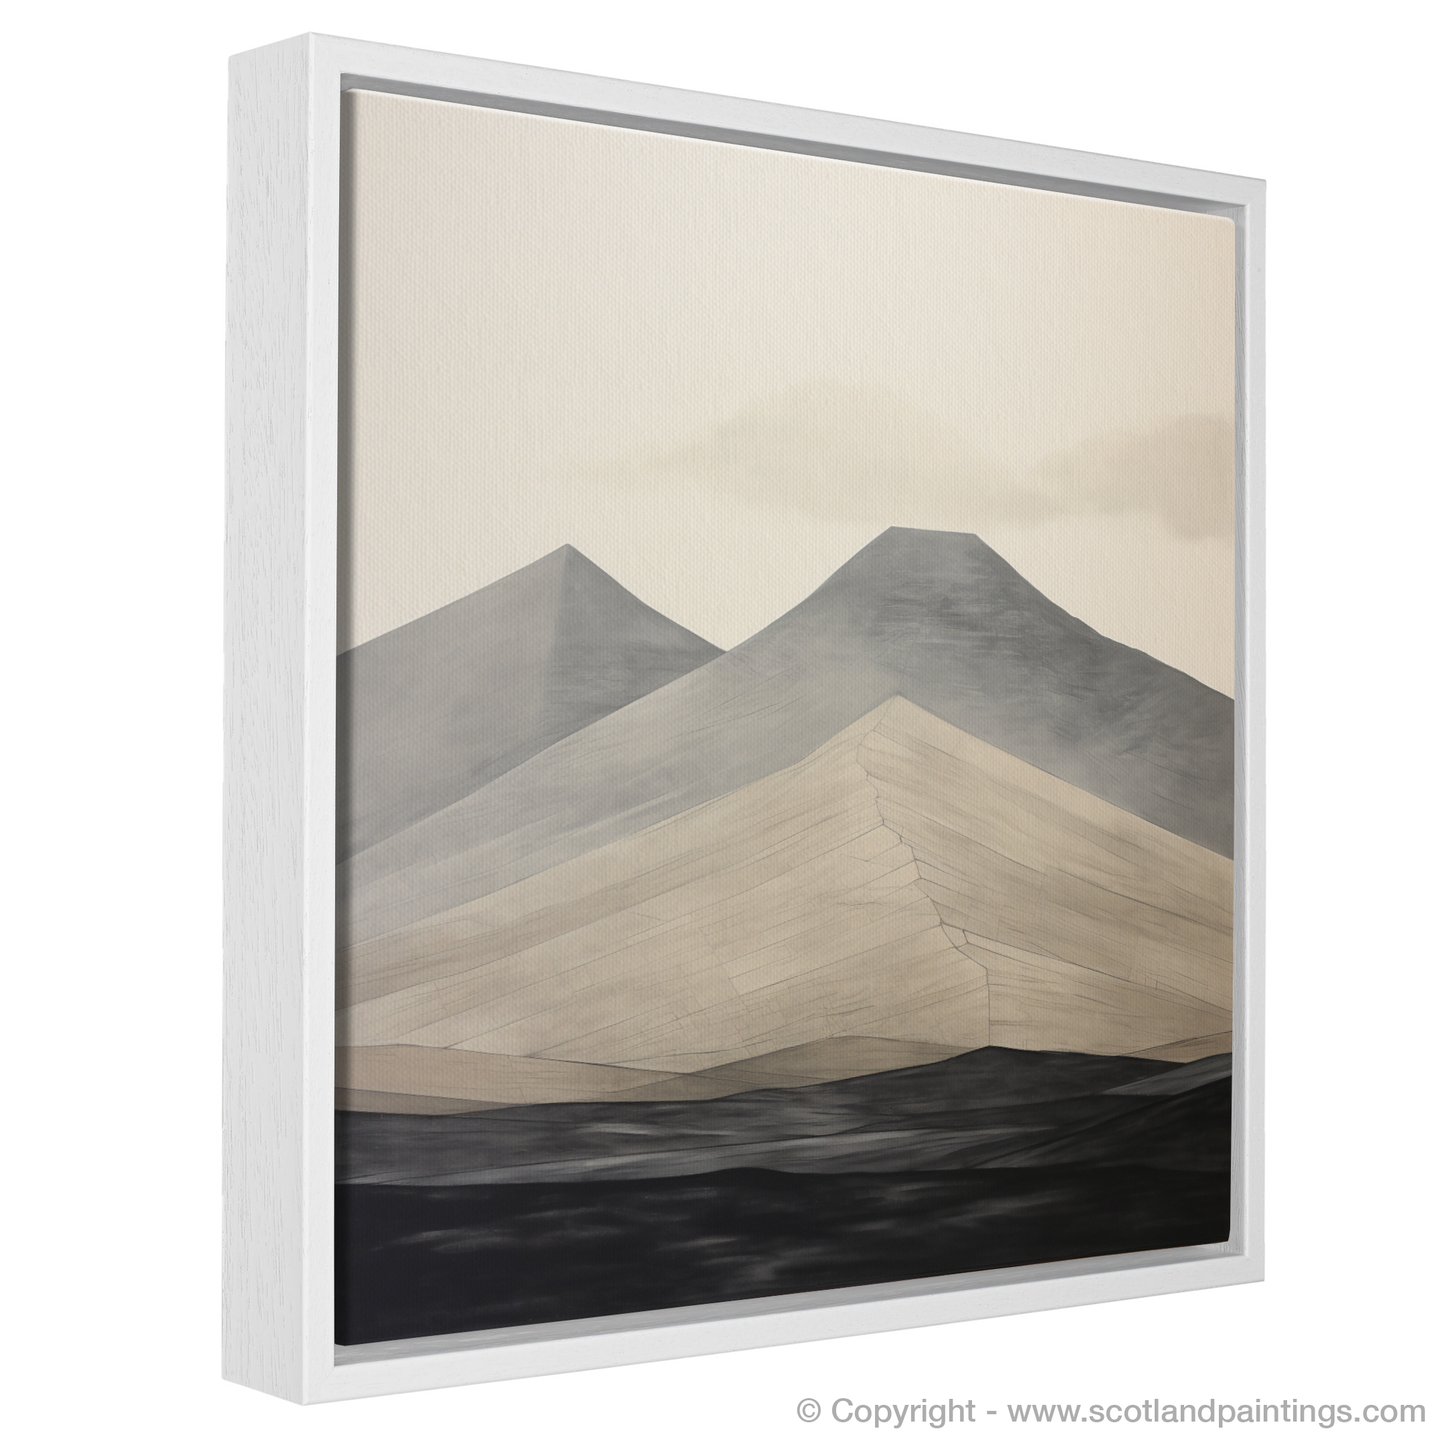 Painting and Art Print of Meall Garbh (Ben Lawers) entitled "Abstract Essence of Meall Garbh".